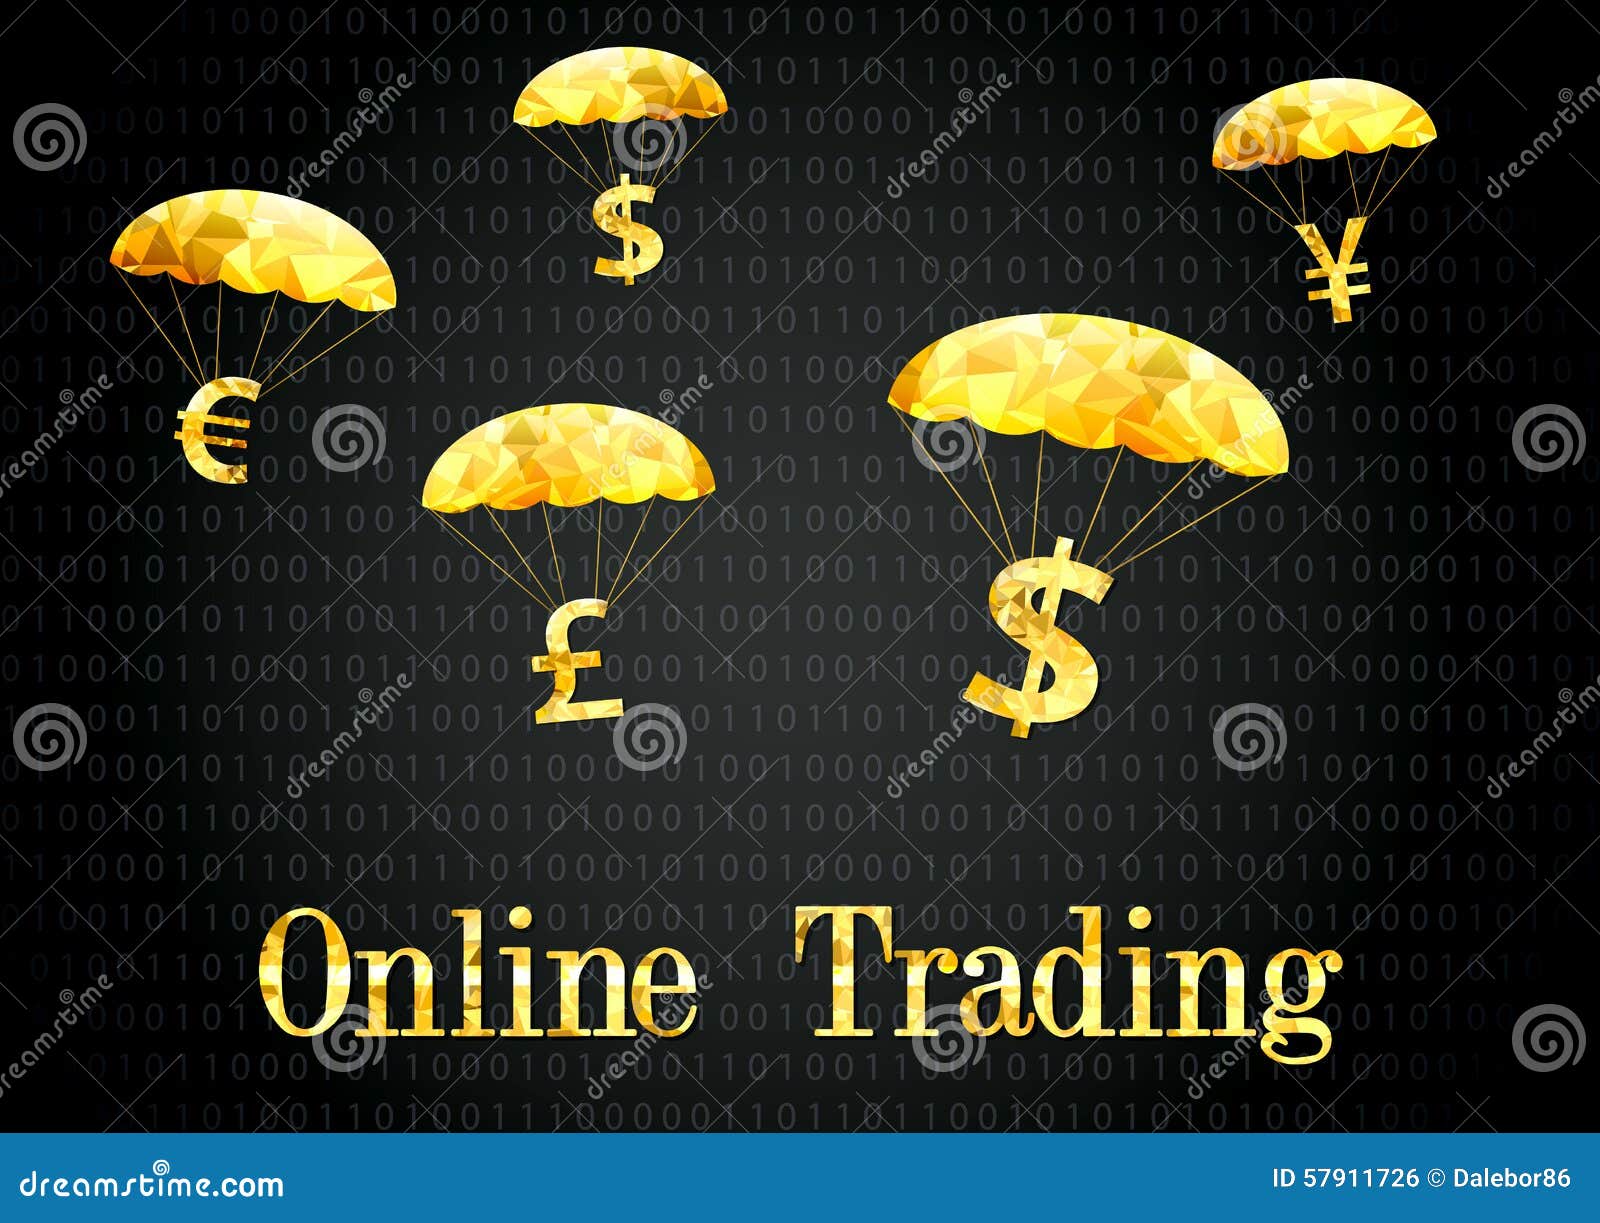 Binary options 5 minutes strategy